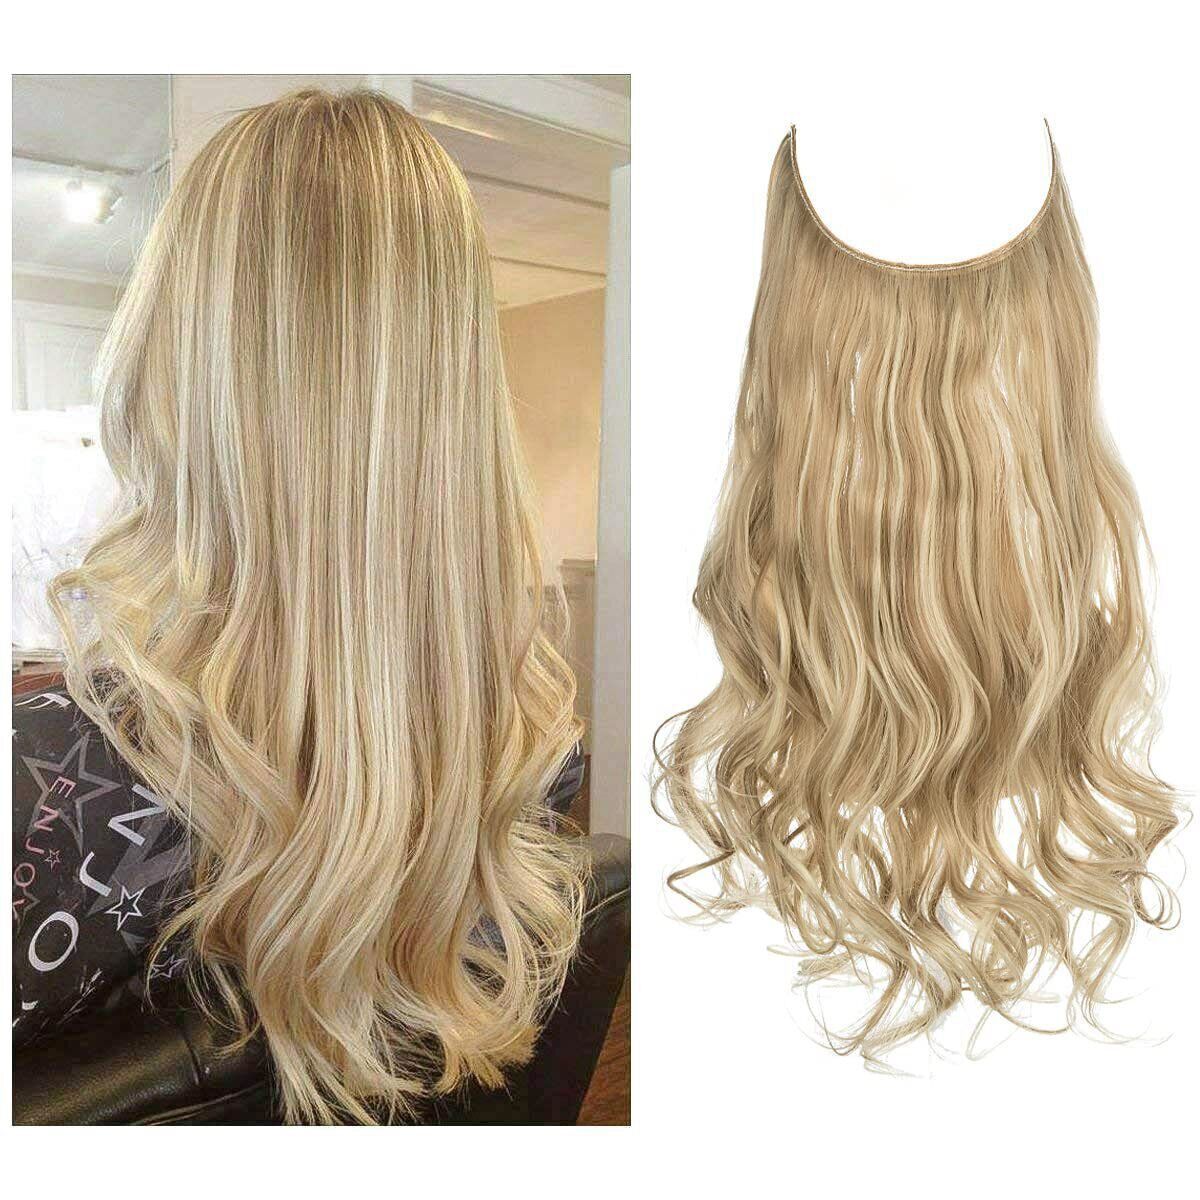 Primary image for Hair Extensions